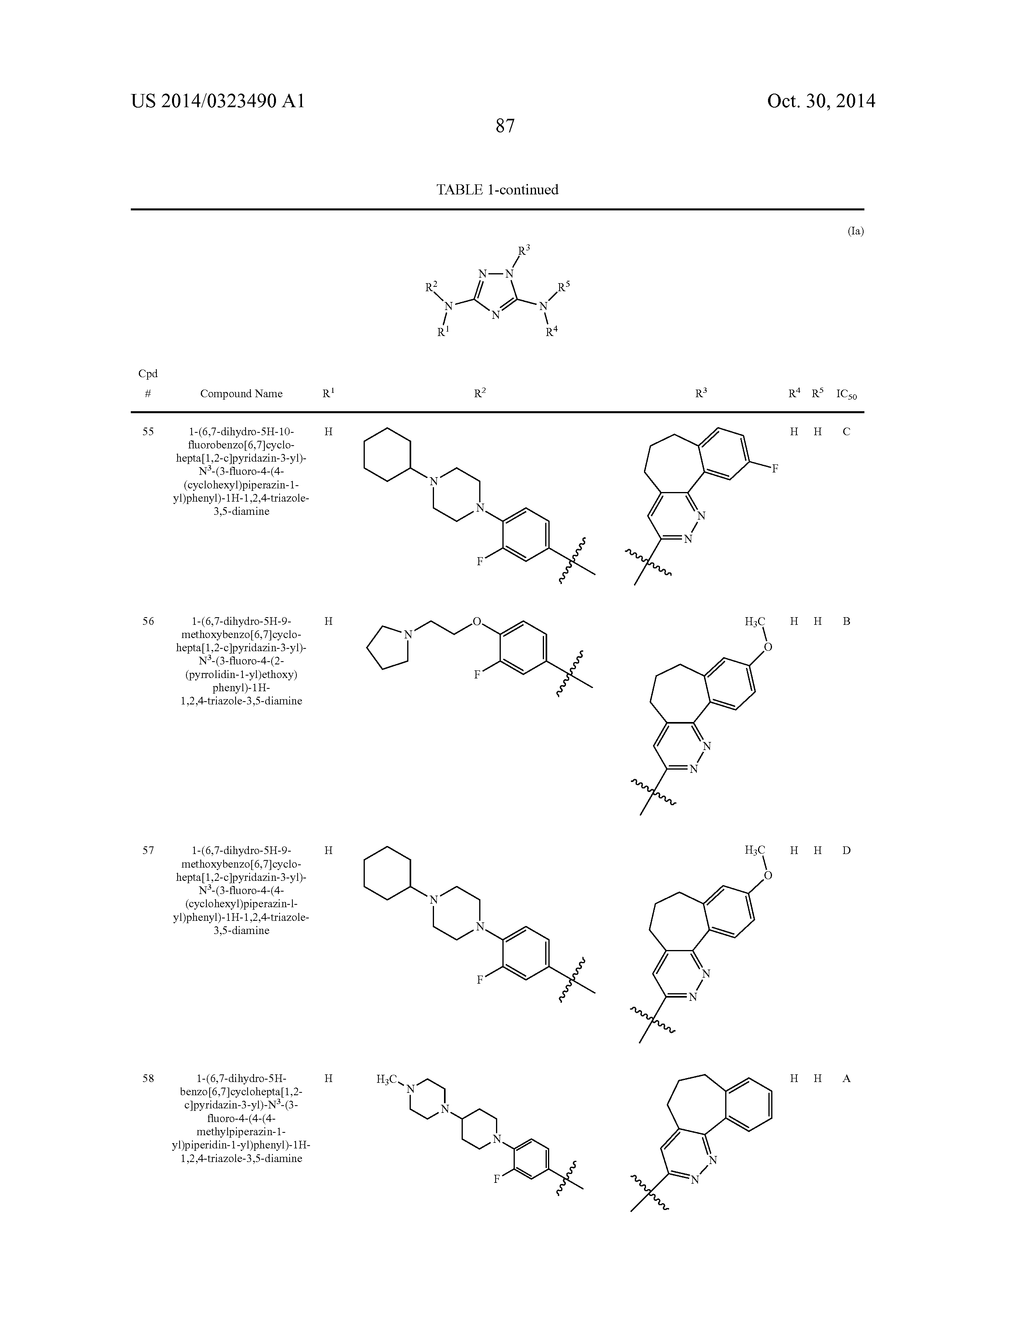 POLYCYCLIC HETEROARYL SUBSTITUTED TRIAZOLES USEFUL AS AXL INHIBITORS - diagram, schematic, and image 88